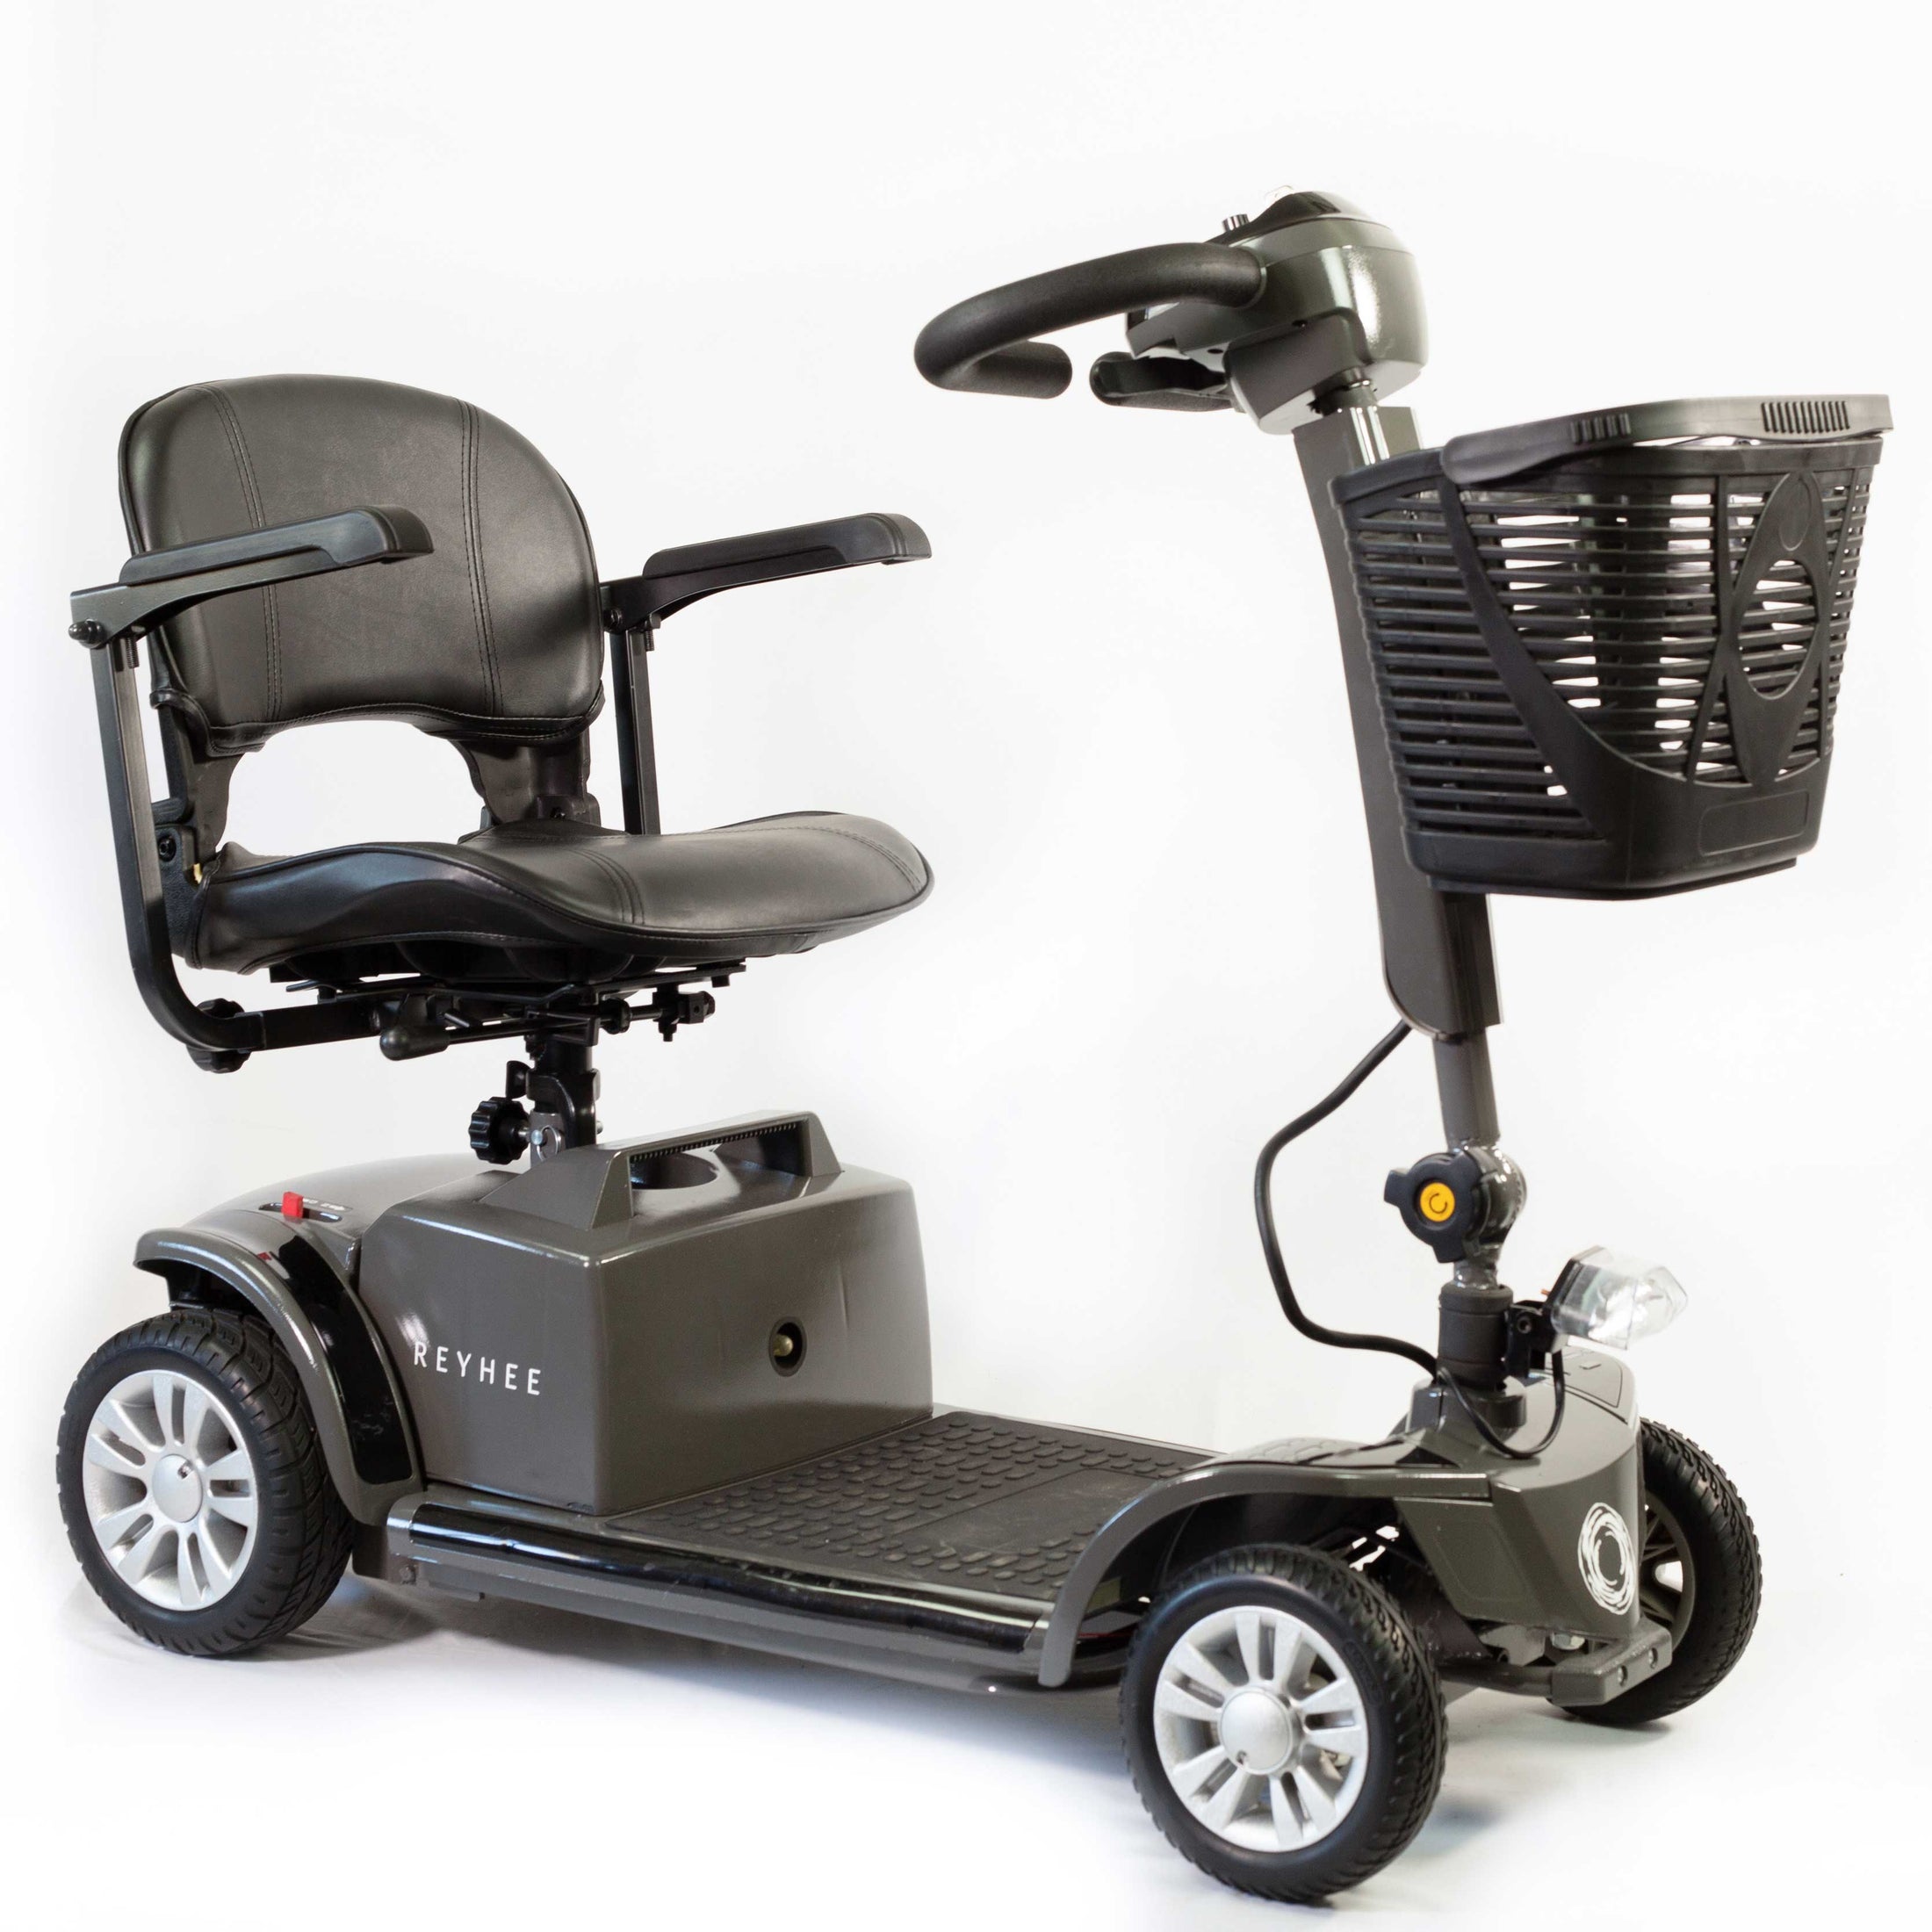 Right side angle view of the black Reyhee Cruiser mobility scooter